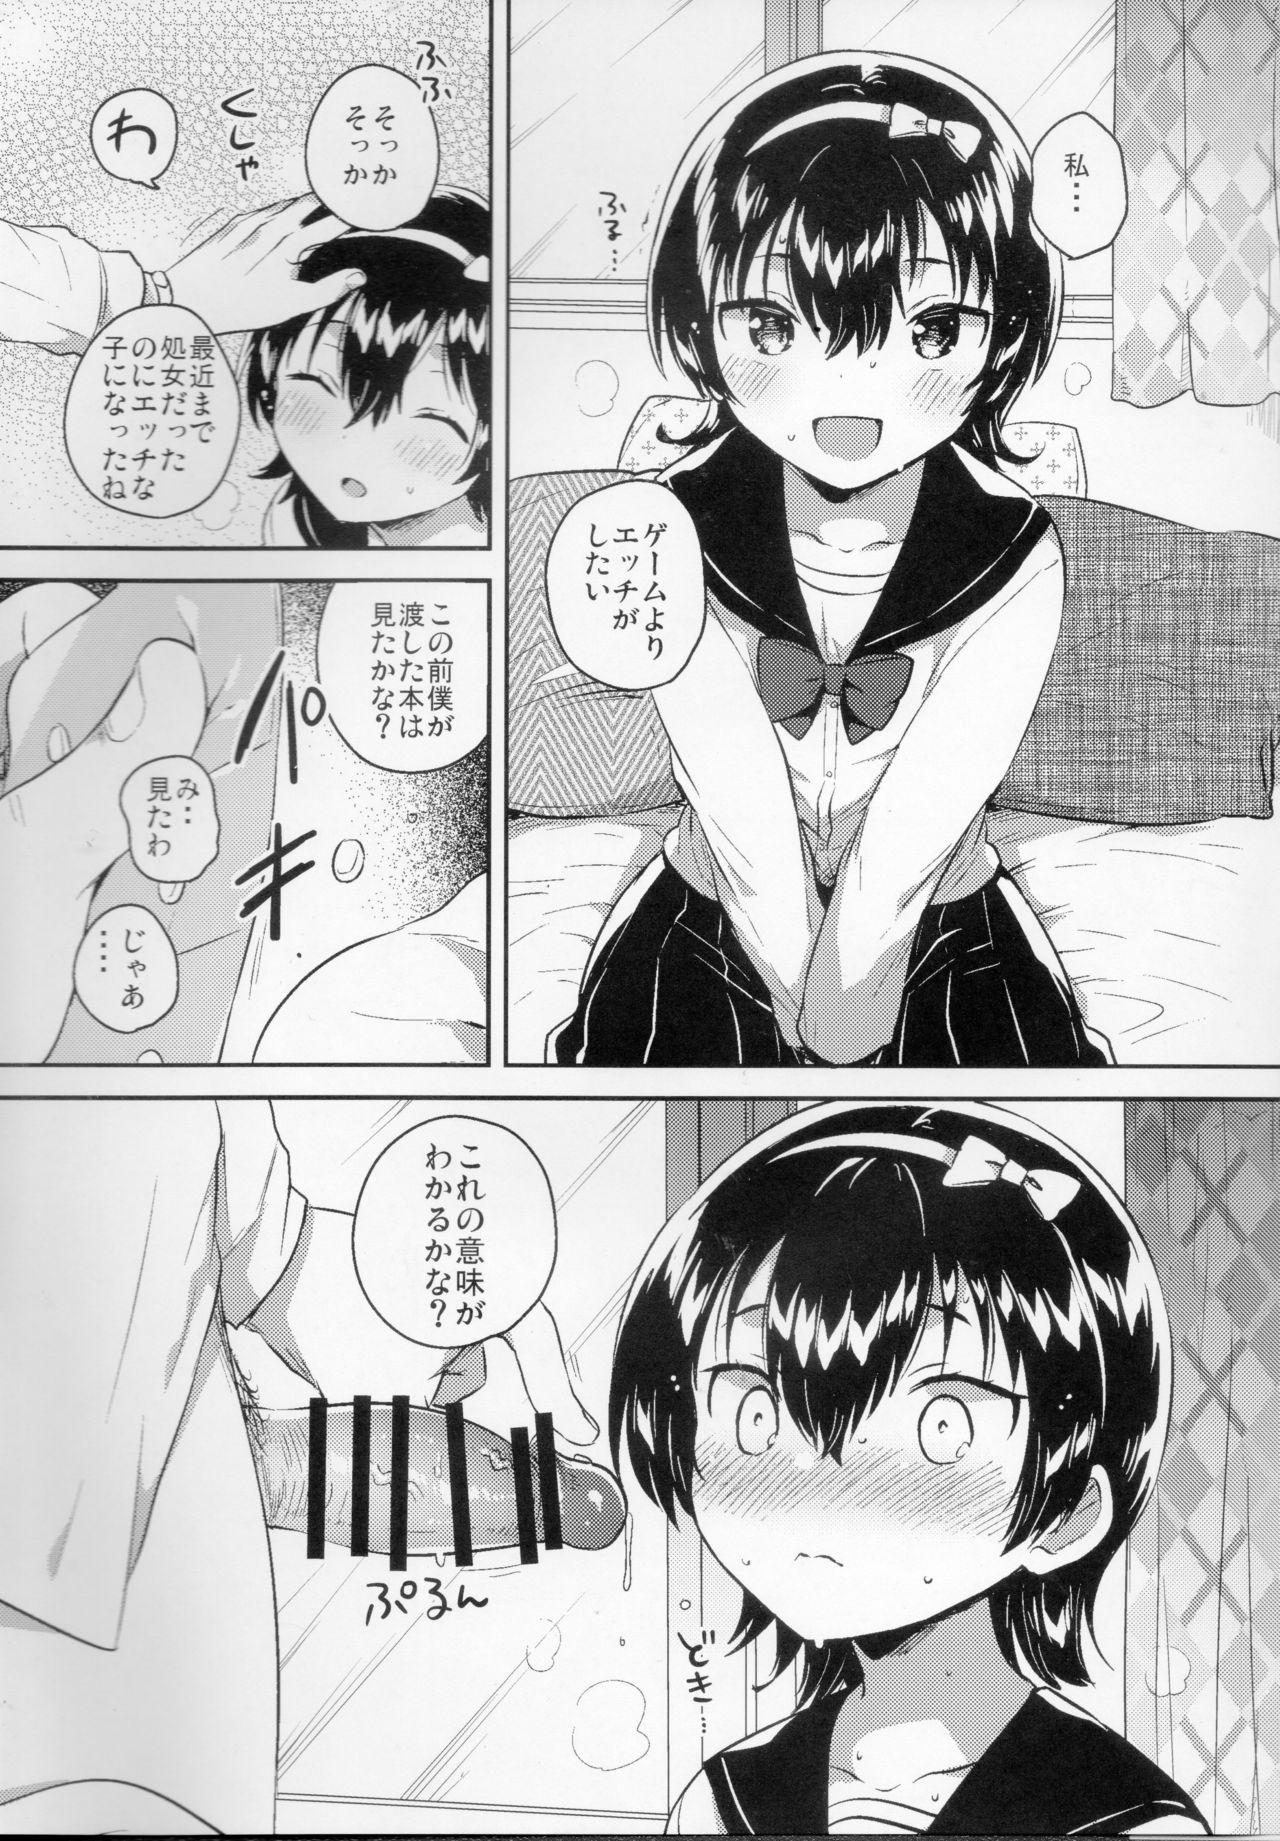 Show Anoko wa Marionette - She Is marionette - Original Facials - Page 8